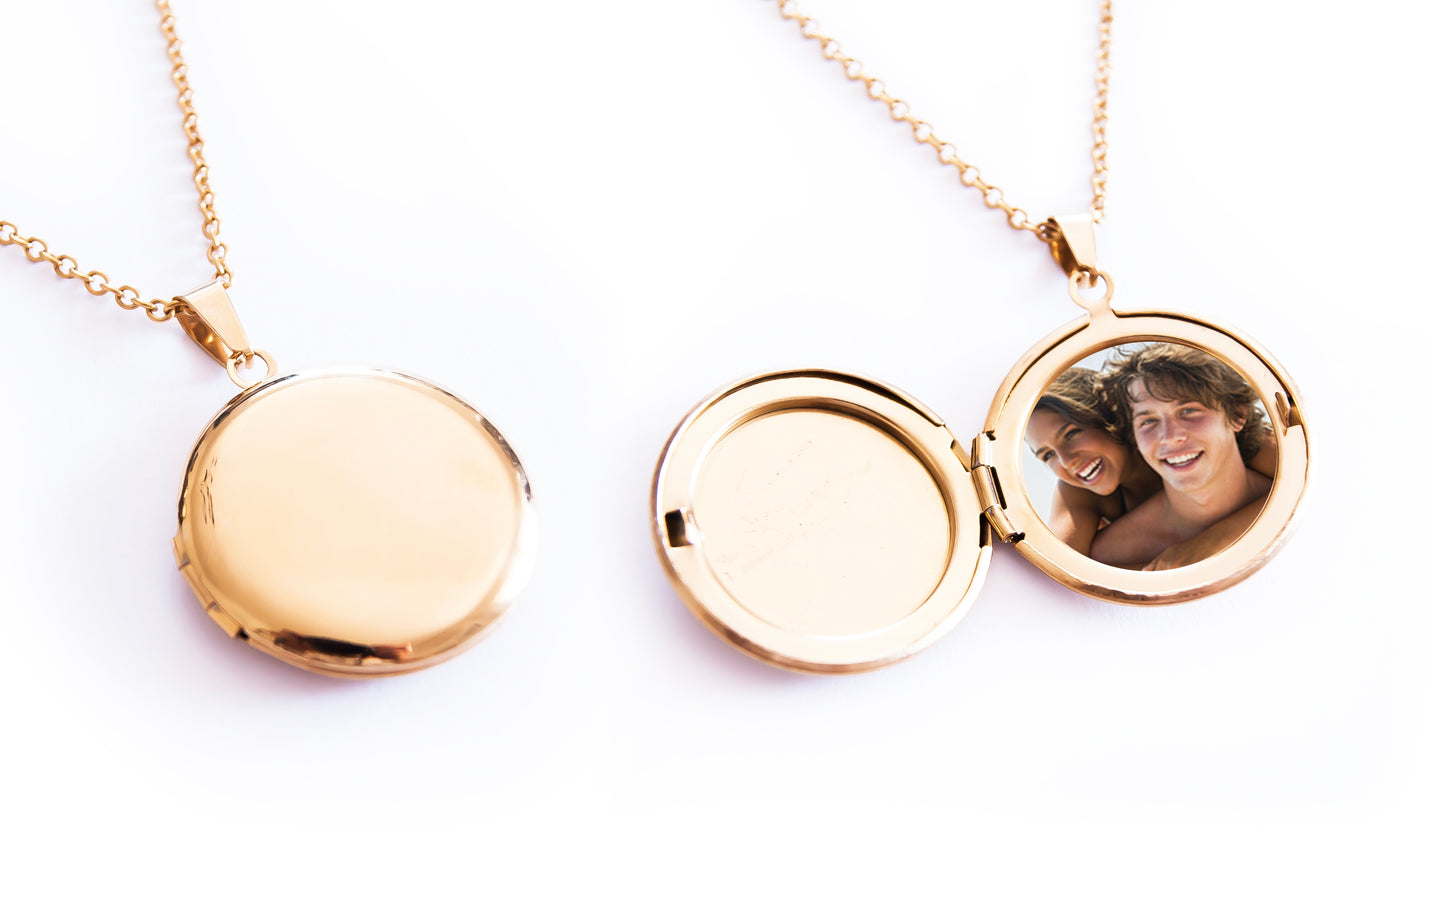 Personalized Locket Necklace with Photo - Unique Gift for Girlfriend or Wife